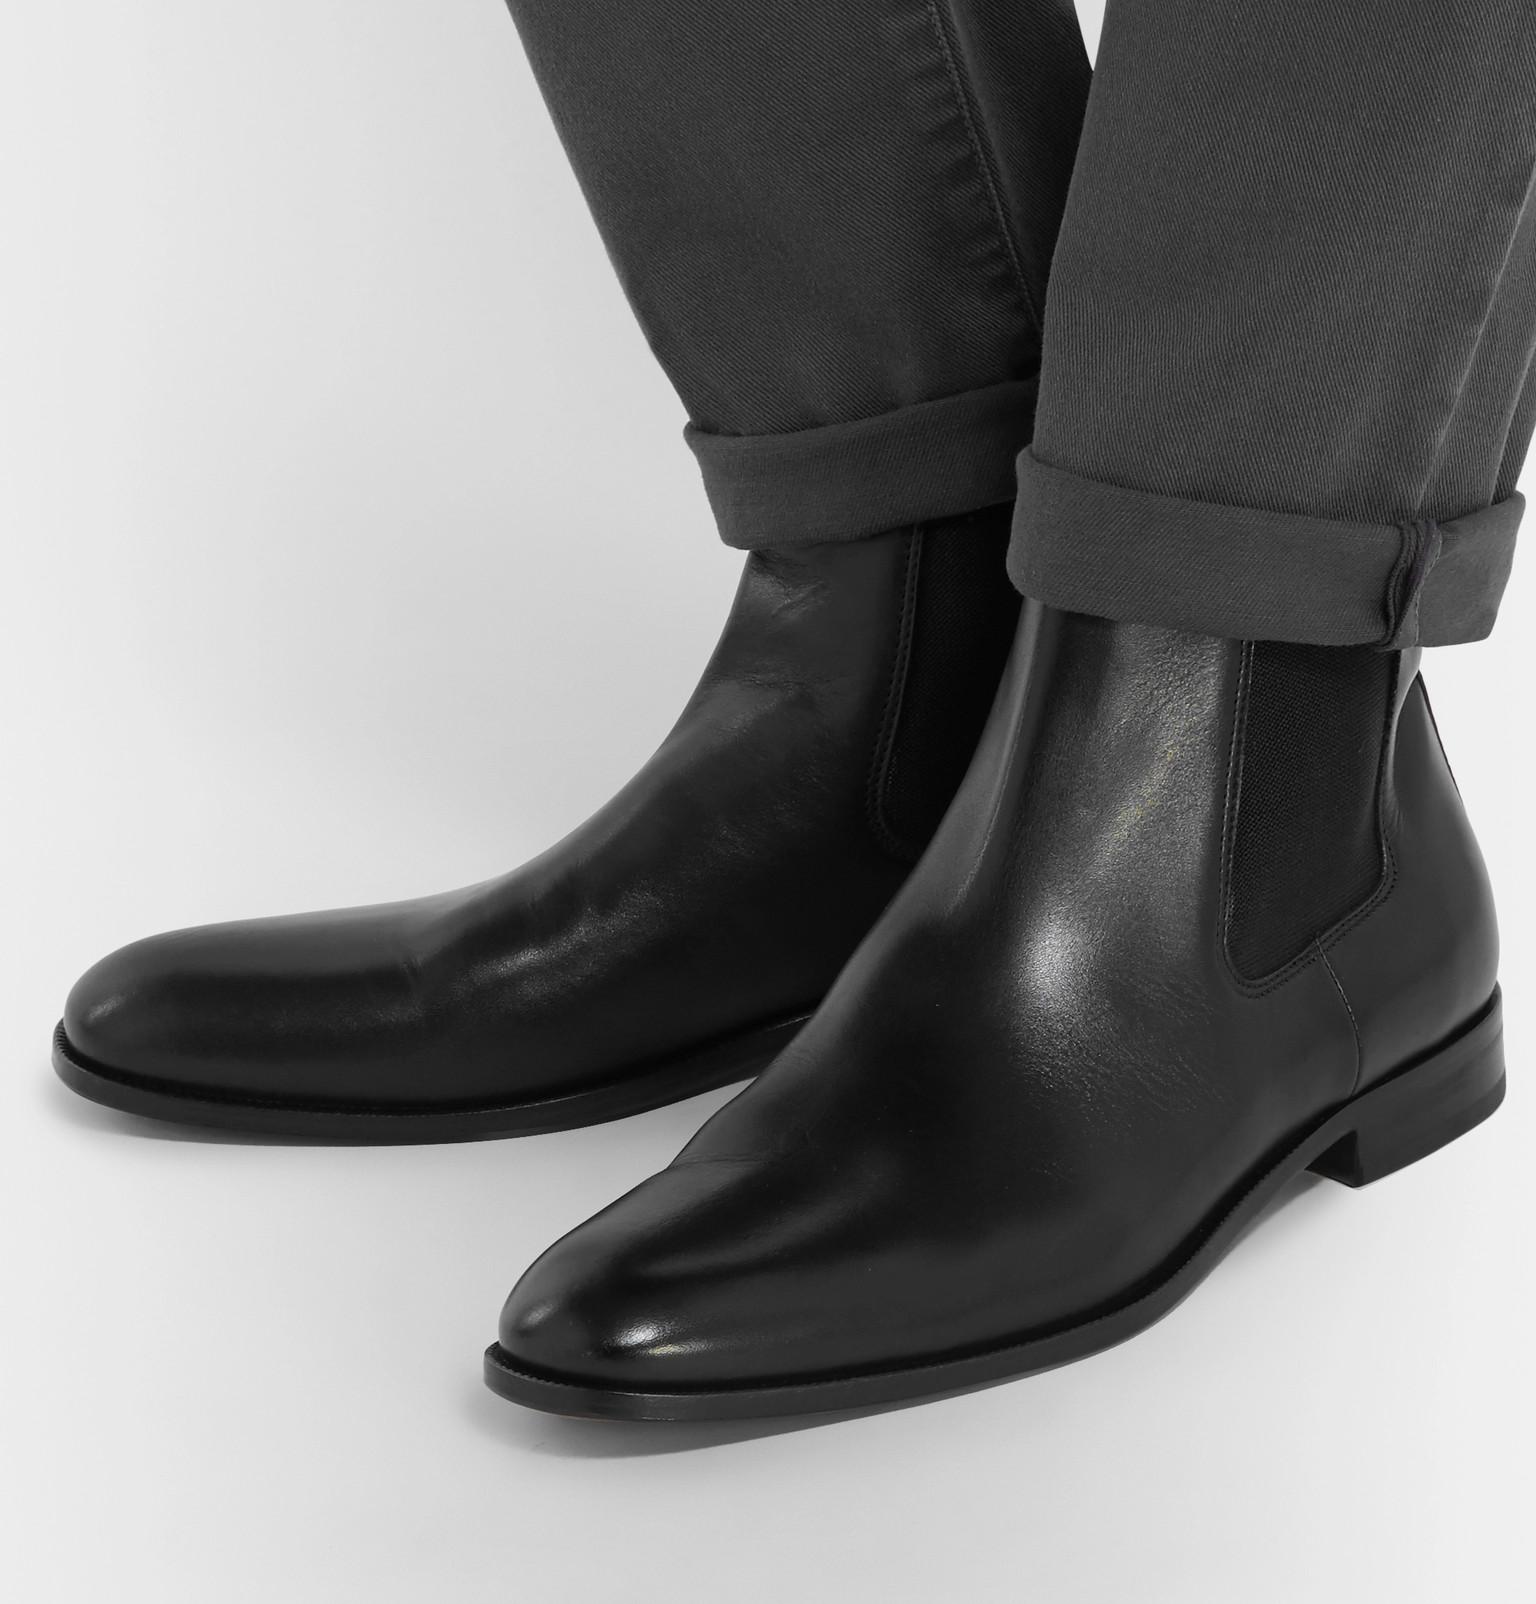 BOSS by Hugo Boss Cardiff Leather Chelsea Boots in Black for Men - Lyst